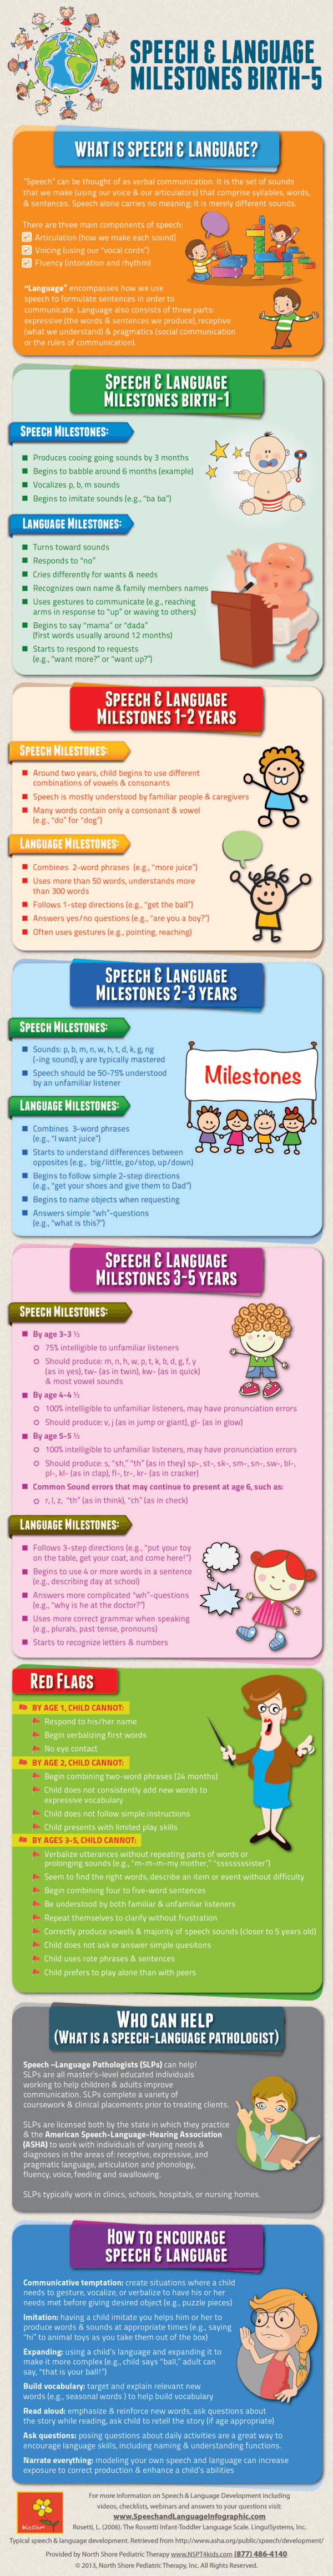 Speech-and-Language-Infographic800pixels-resized-600